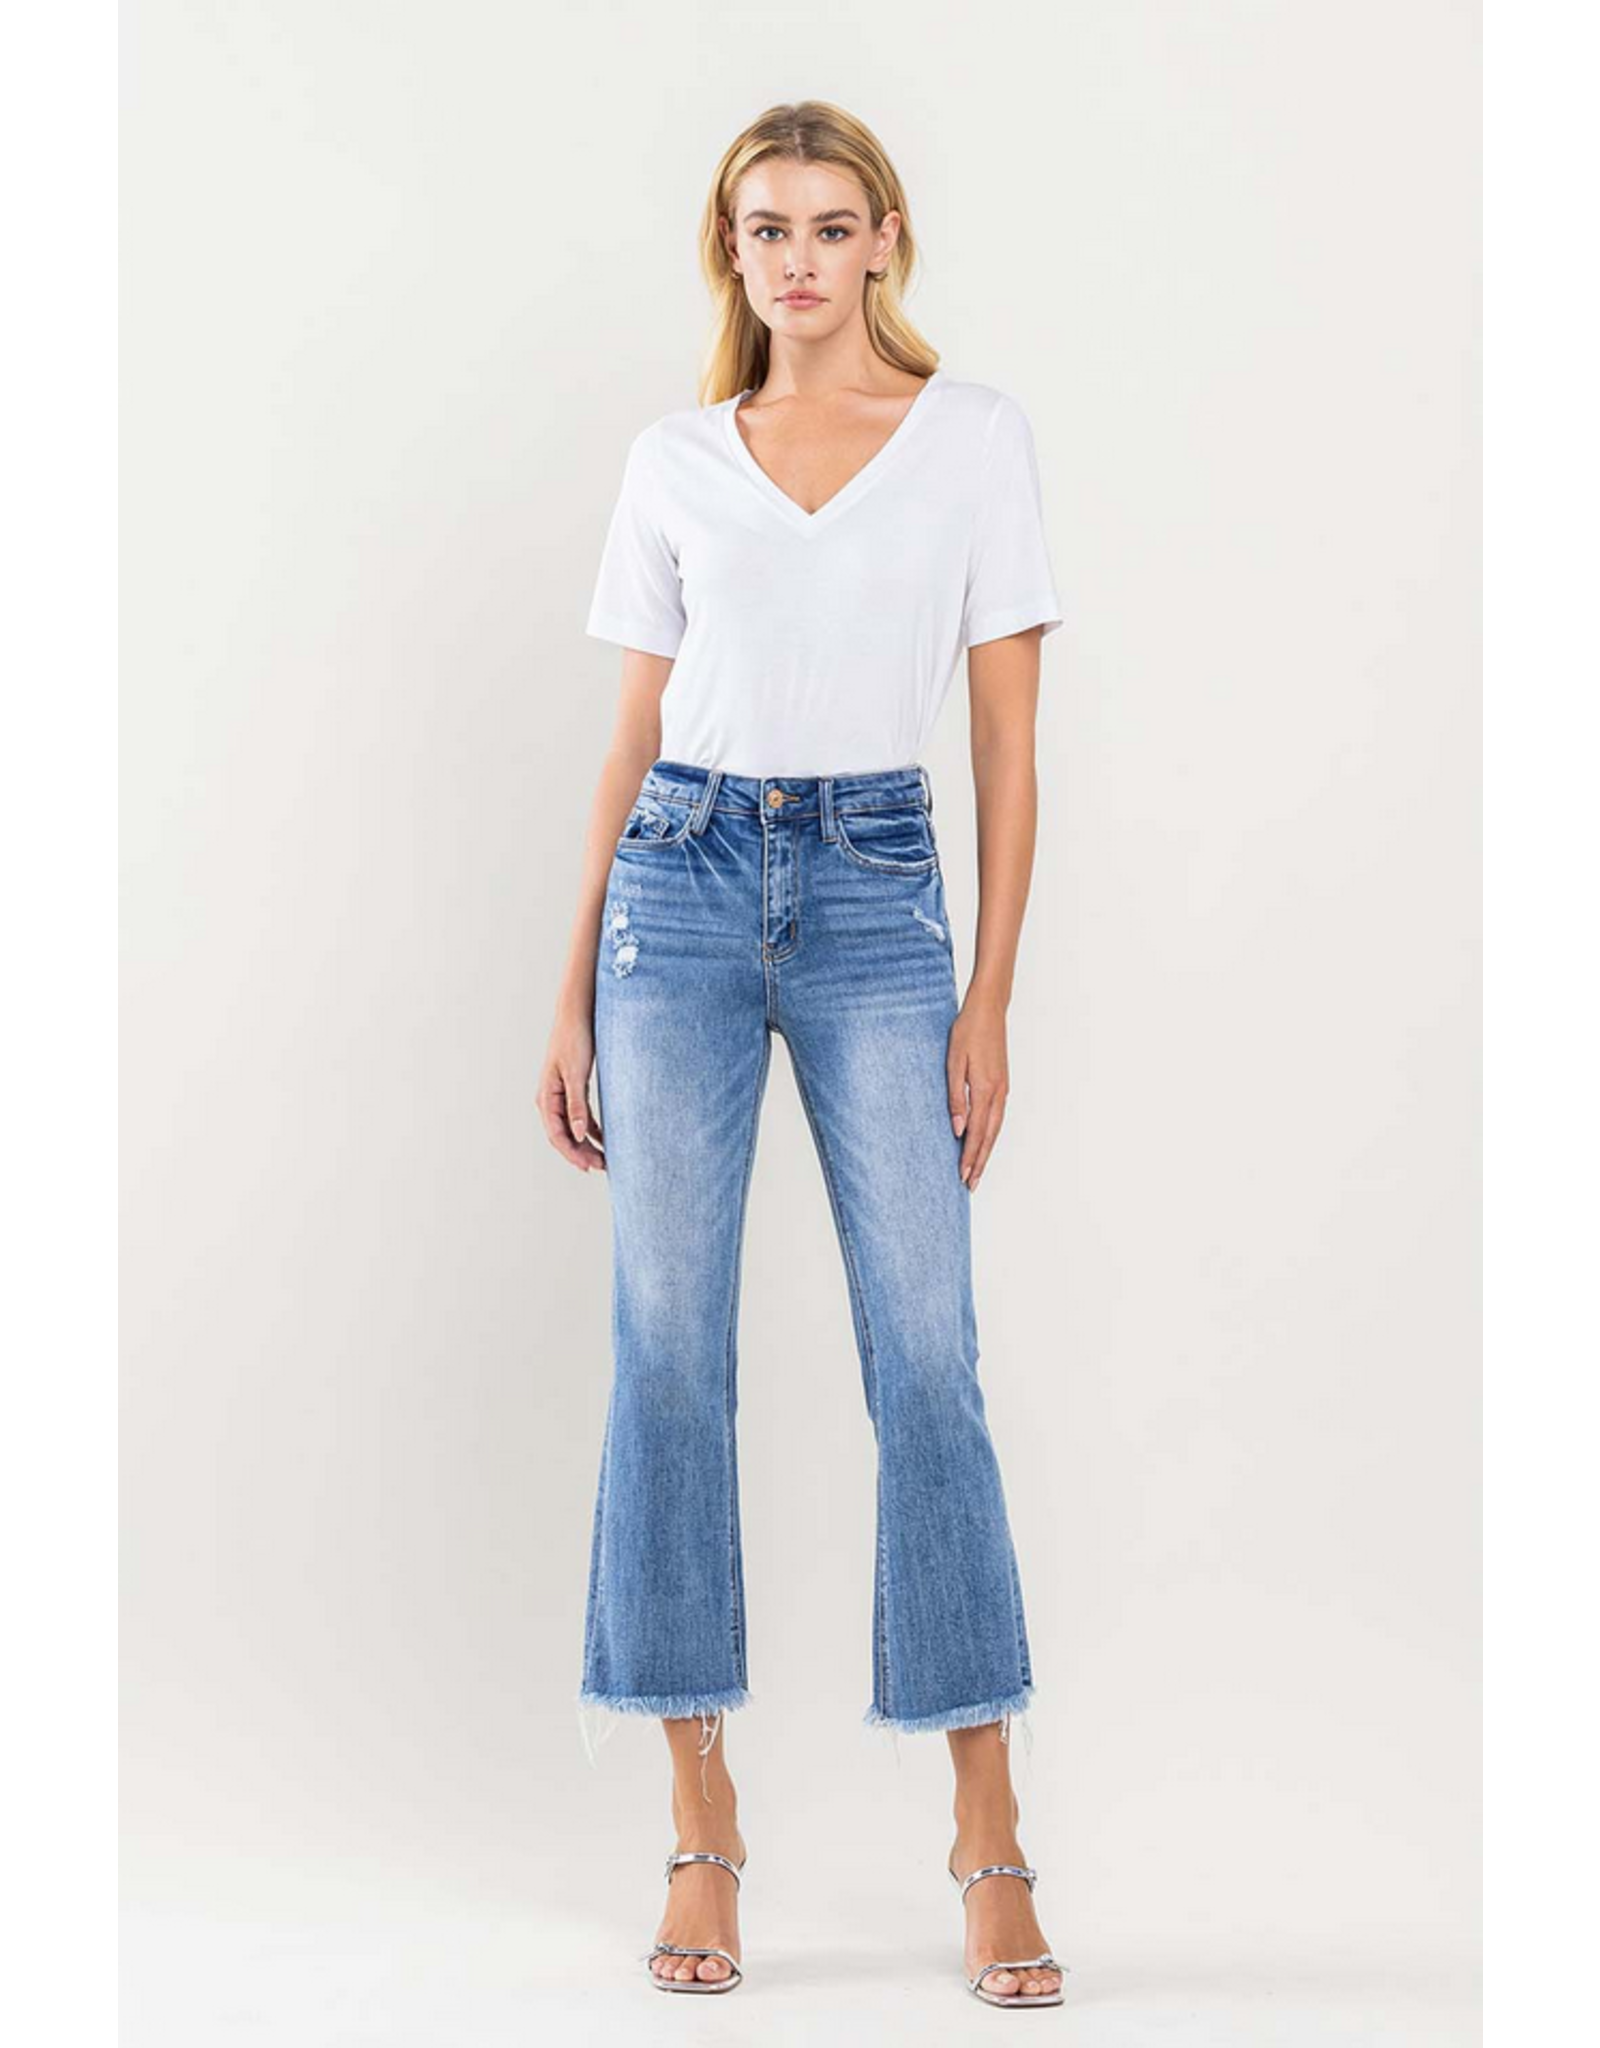 Vervet by Flying Monkey High Rise Kick Flare Cropped Jeans